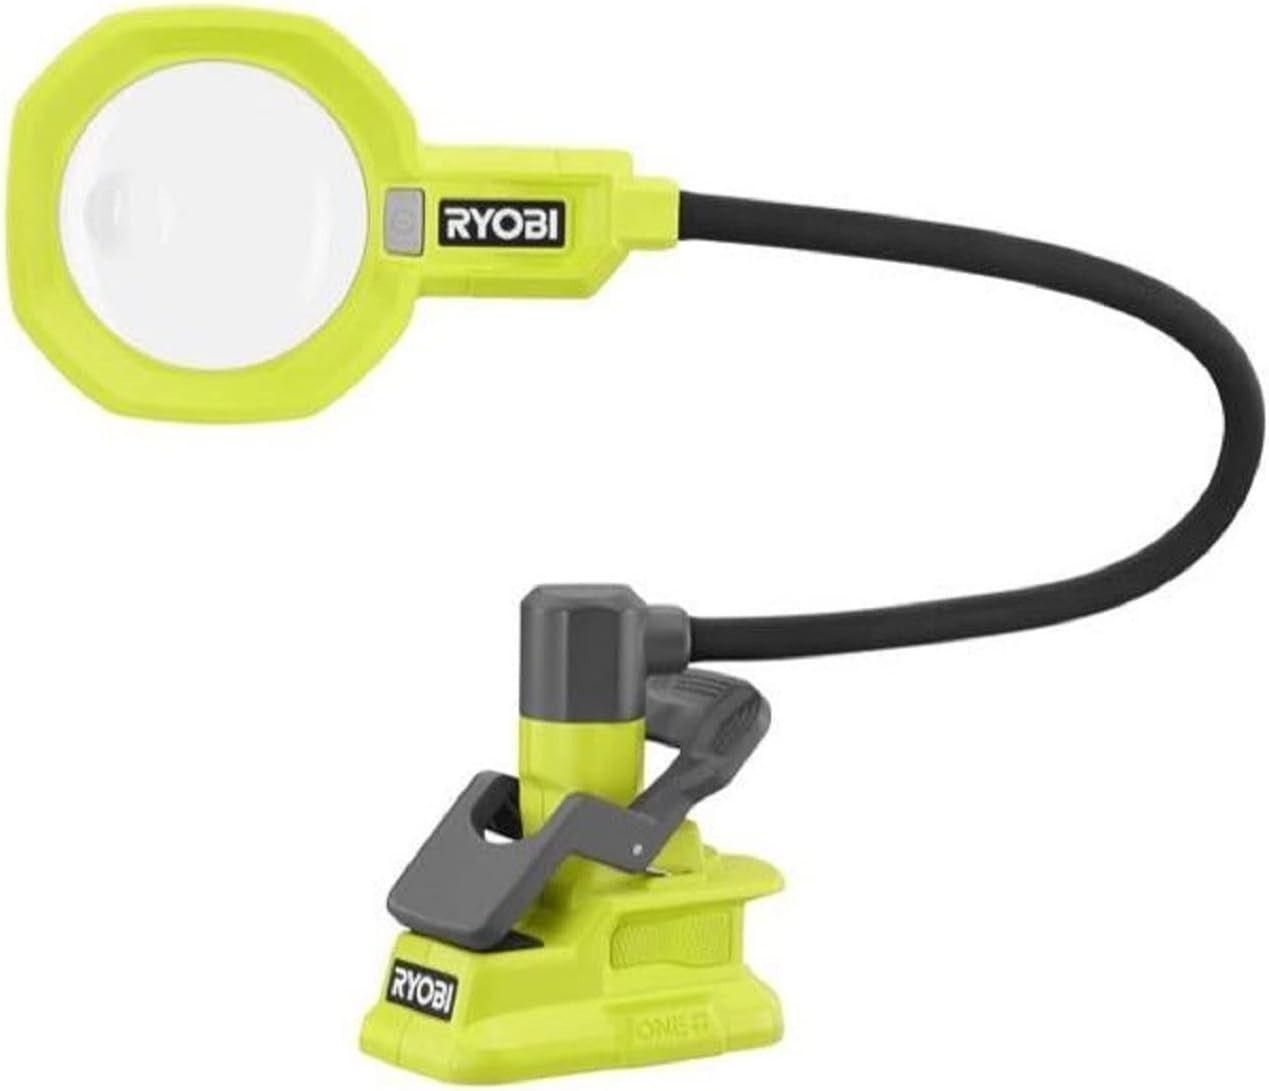 RYOBI  ONE+ PCL664 18V Cordless LED Magnifying Clamp Light Kit with Battery and Charger - Black/Green - Pristine